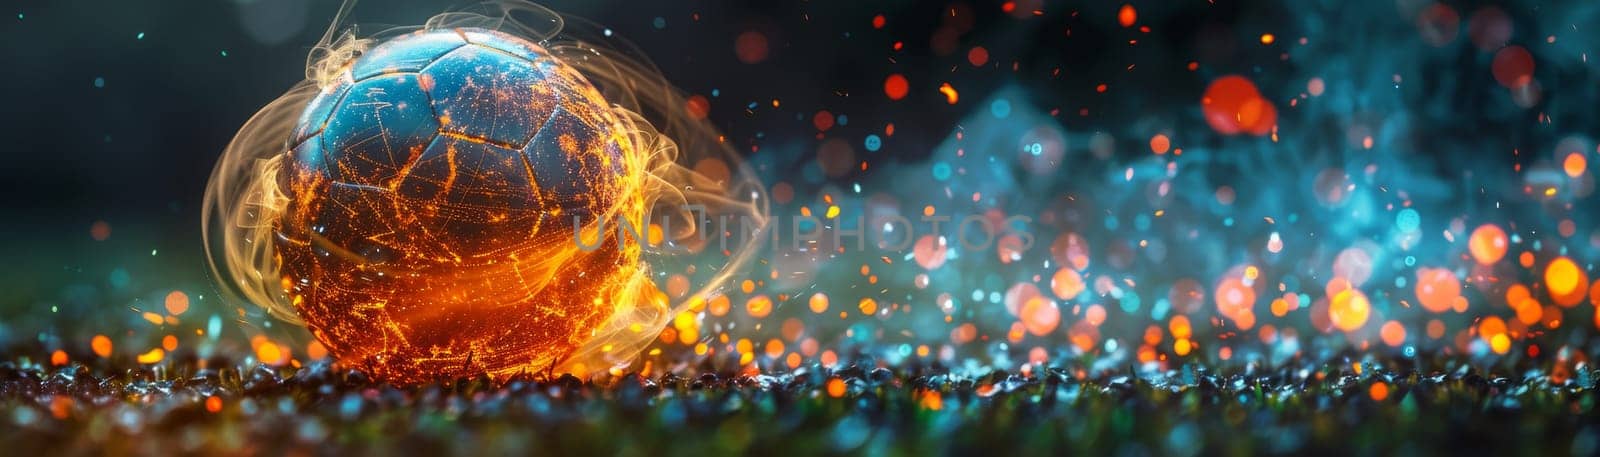 A ball with fire surrounding it. The image has a mood of excitement and energy